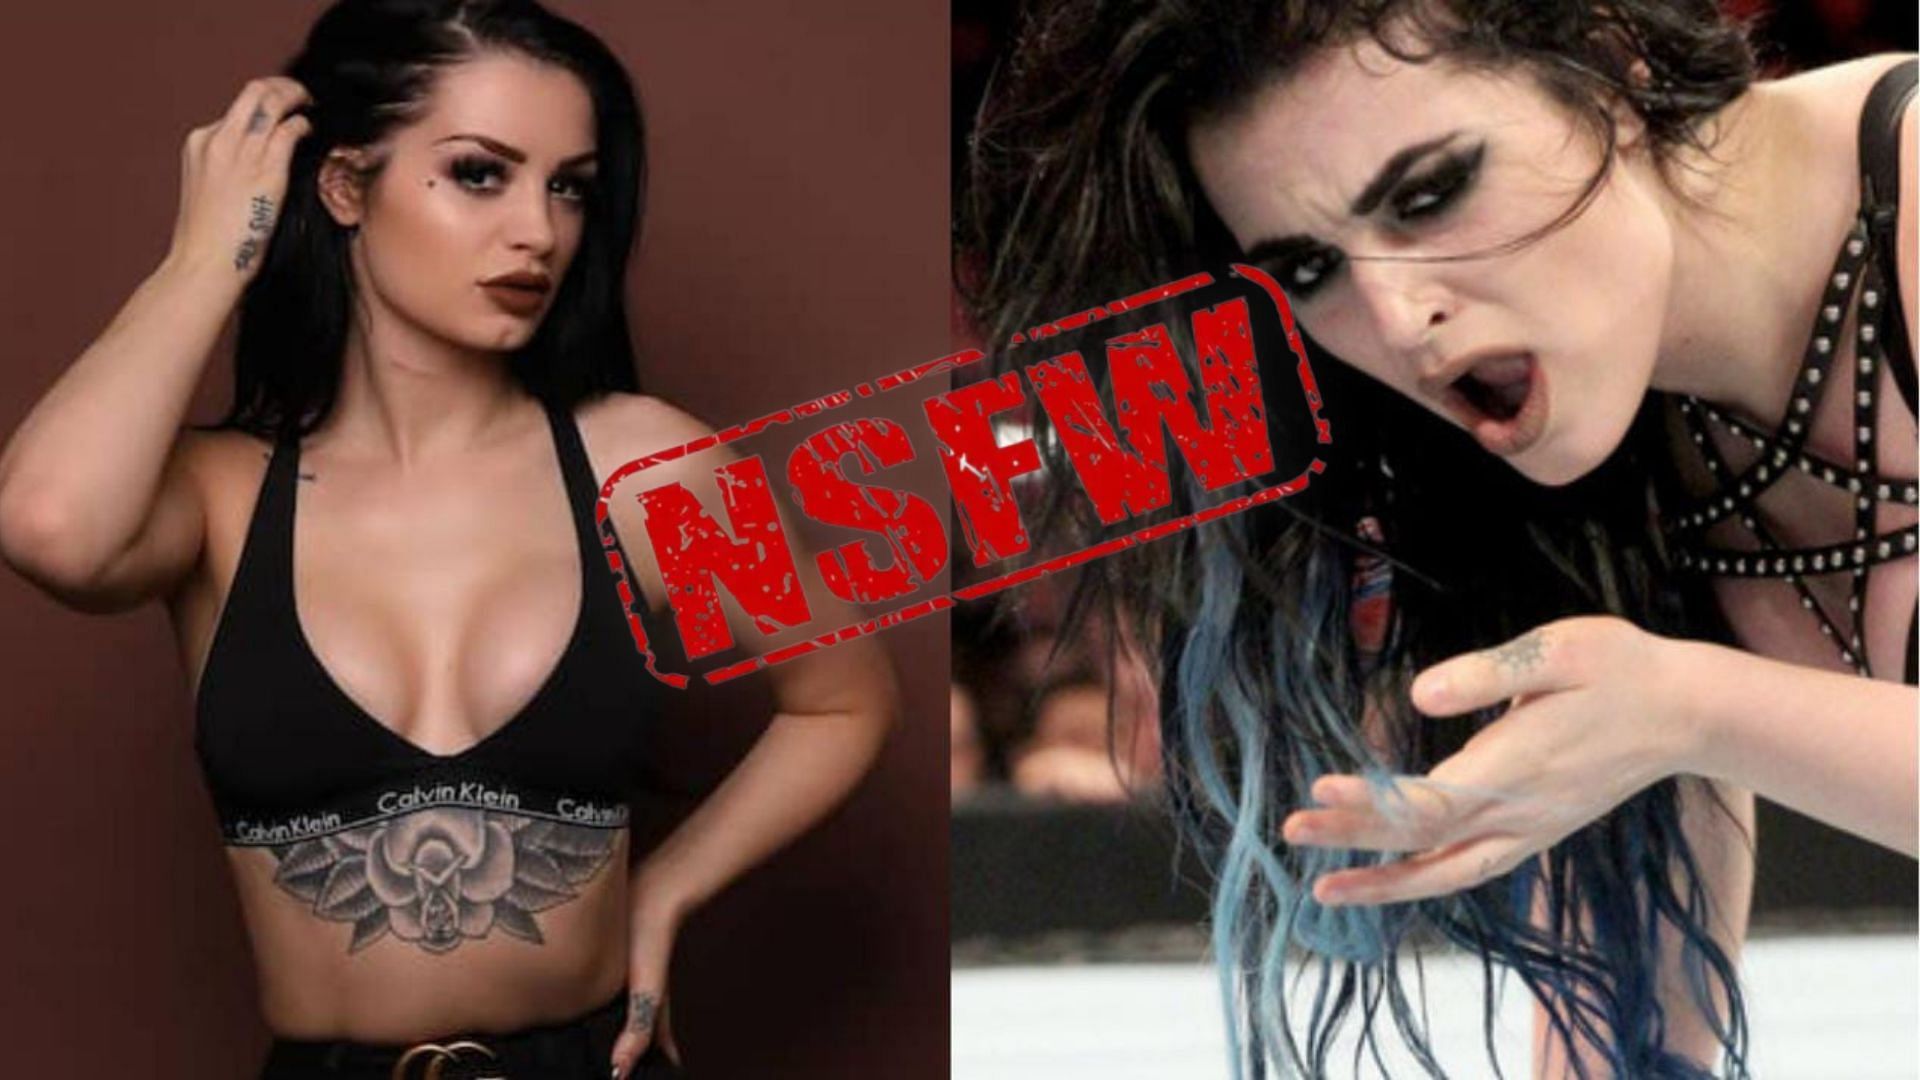 bhaumik rana recommends paige wwe private photos pic